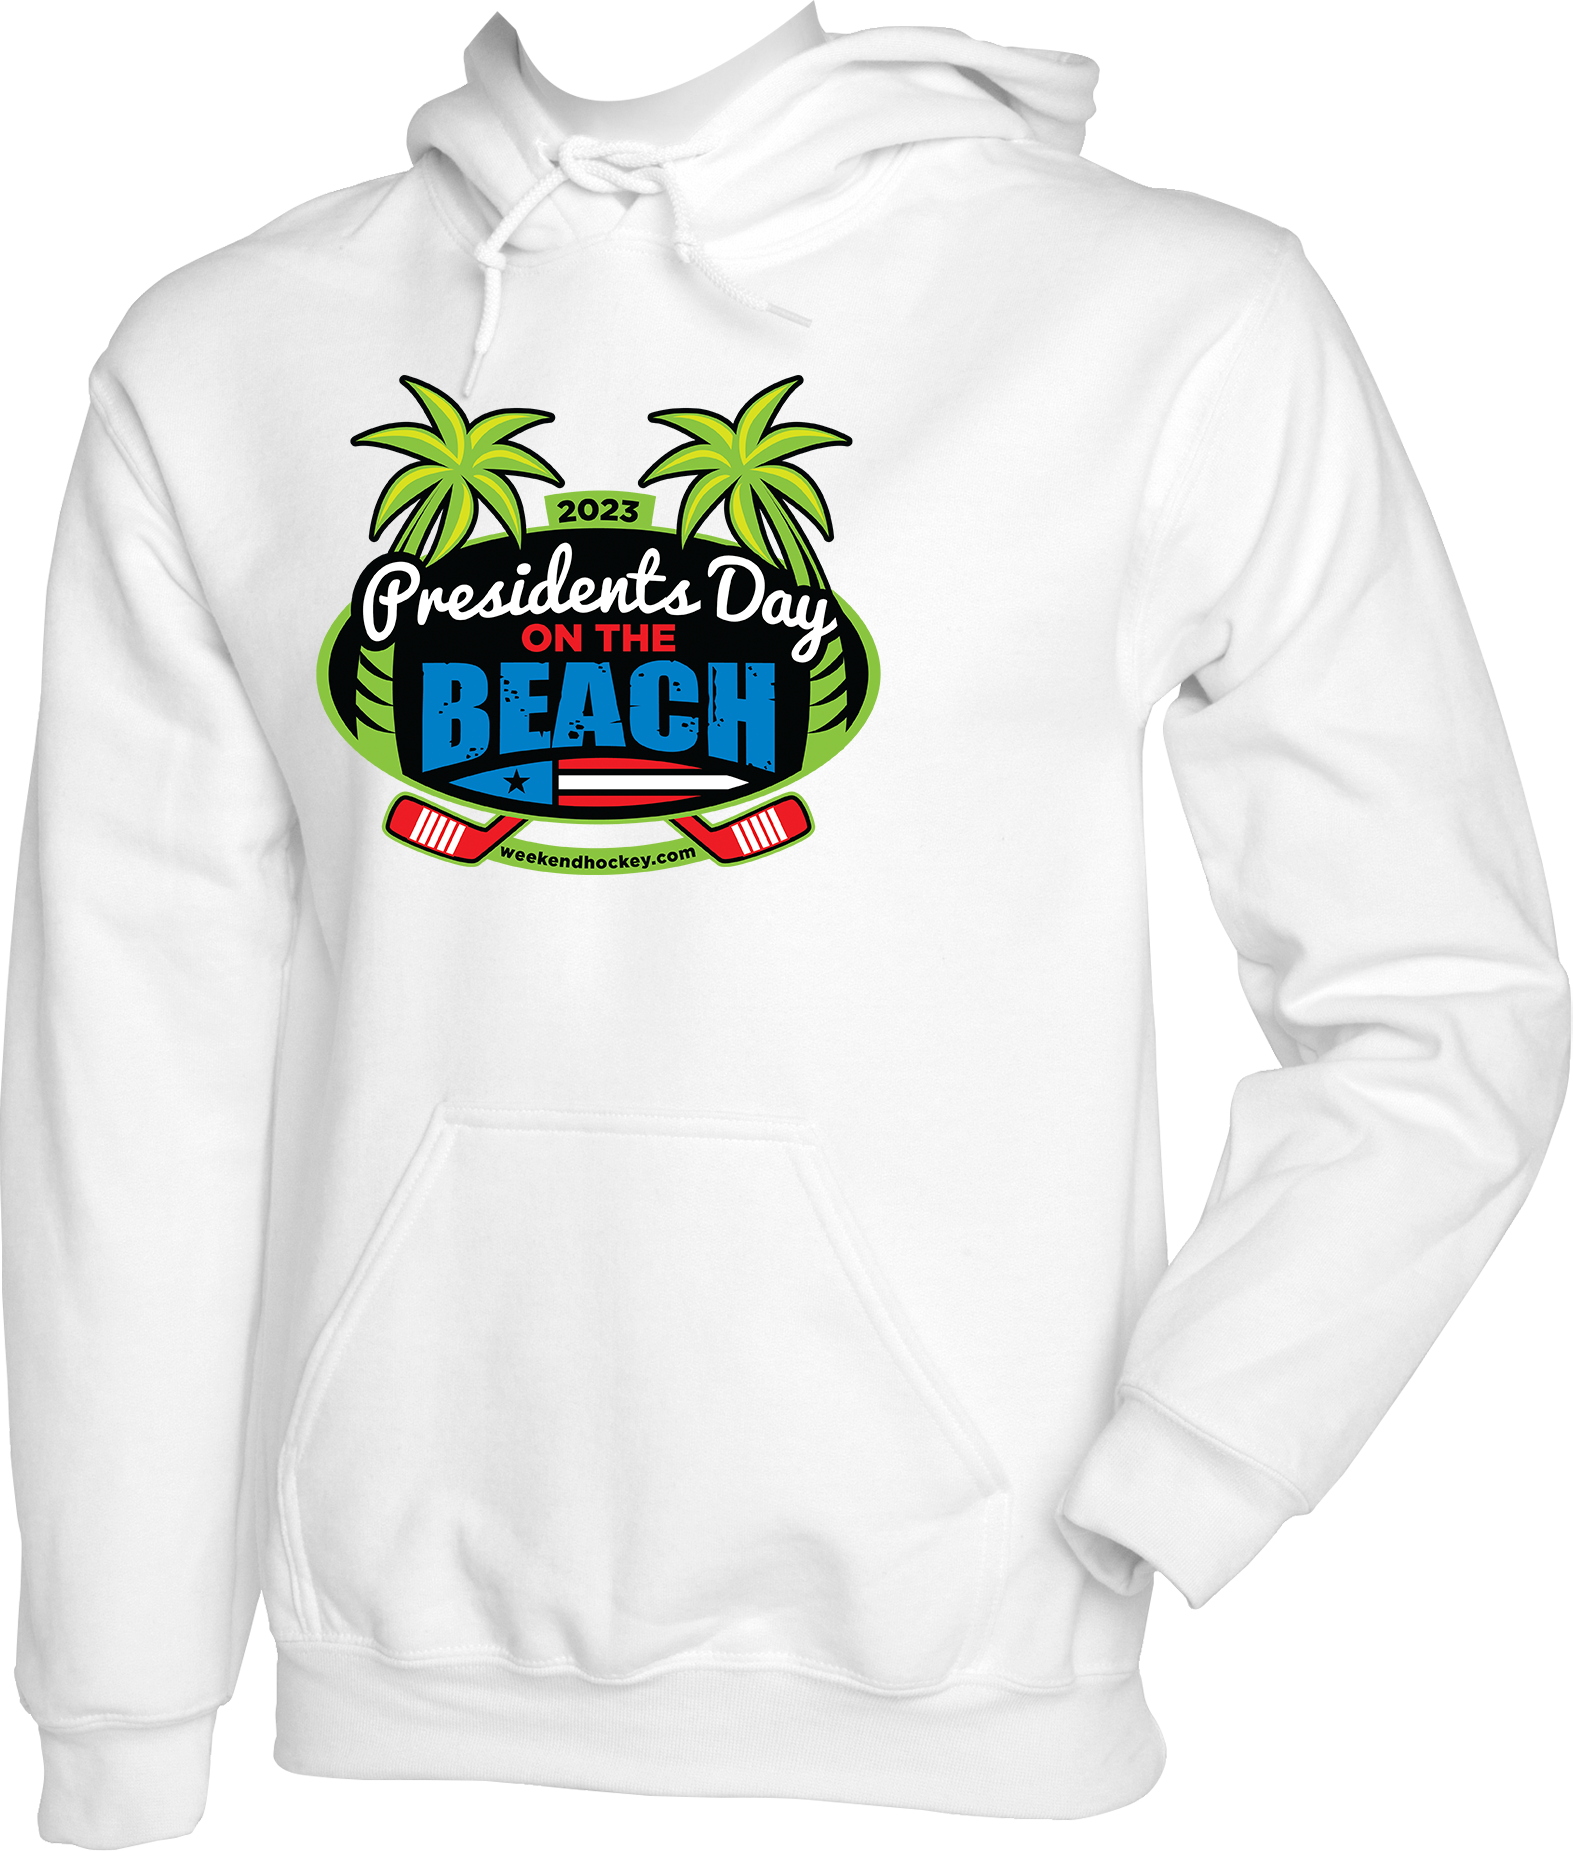 HOODIES - 2023 Presidents Day on the Beach